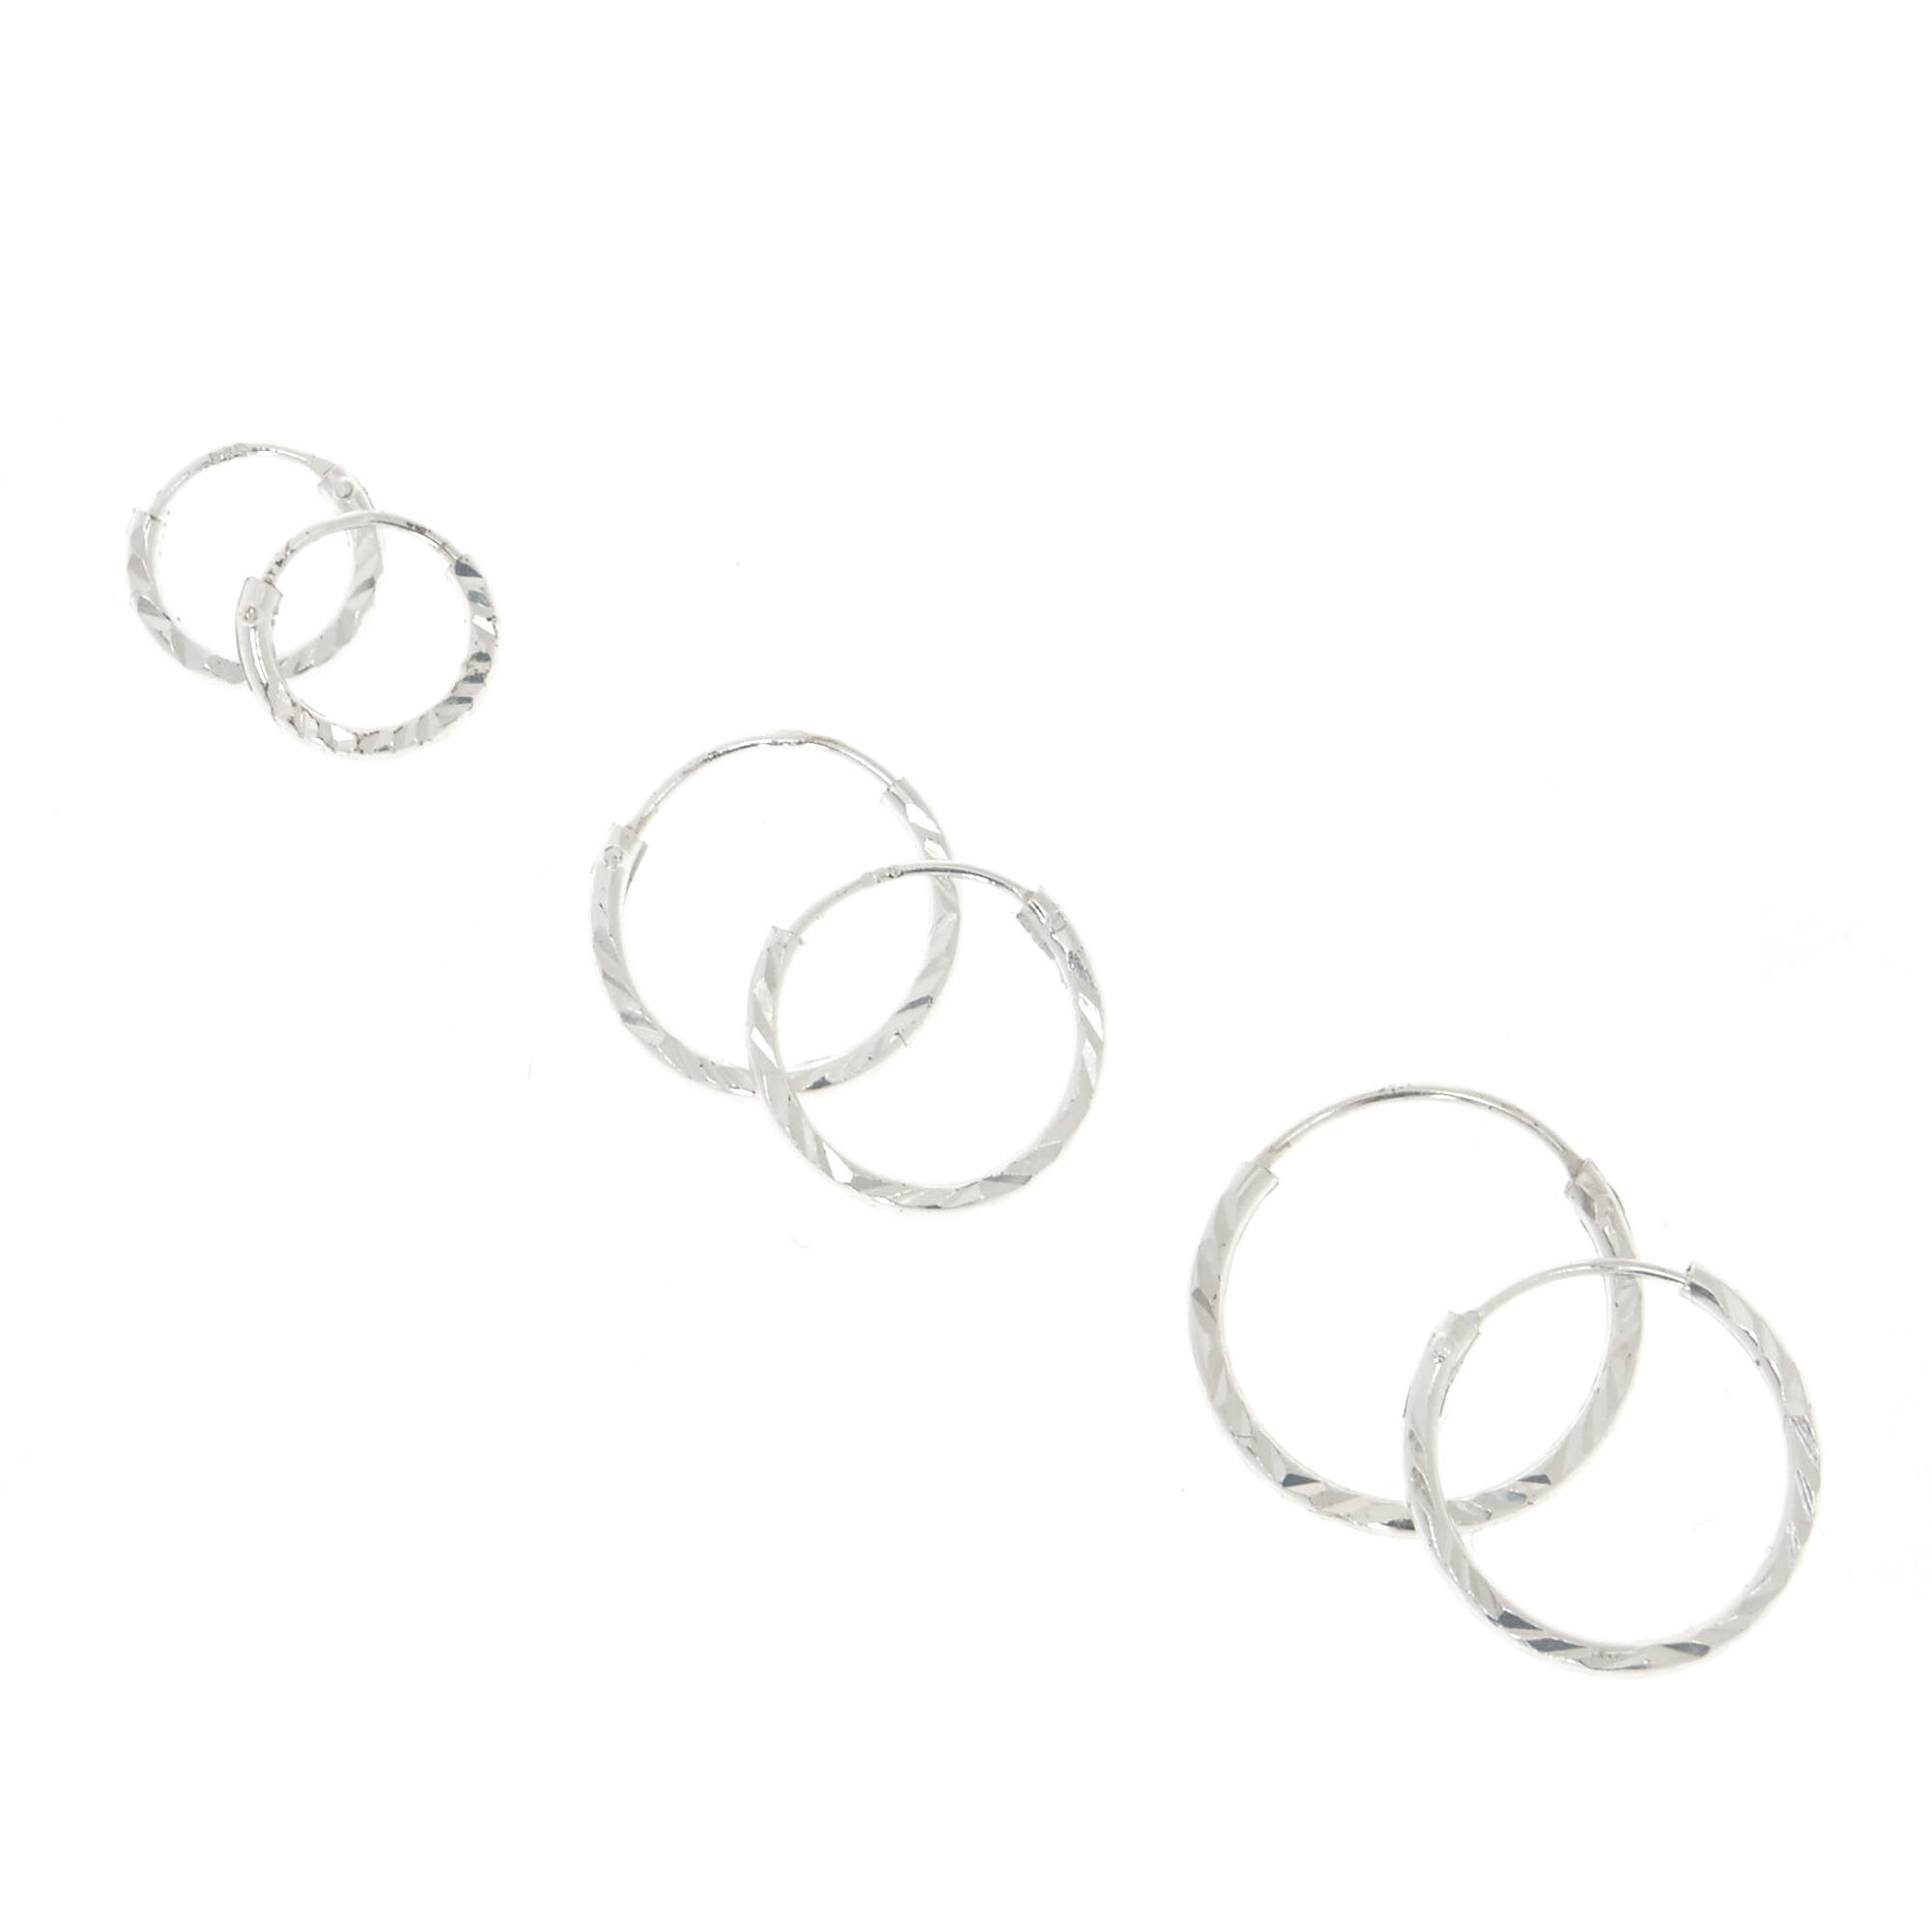 View Claires Graduated Laser Cut Hoop Earrings 3 Pack Silver information